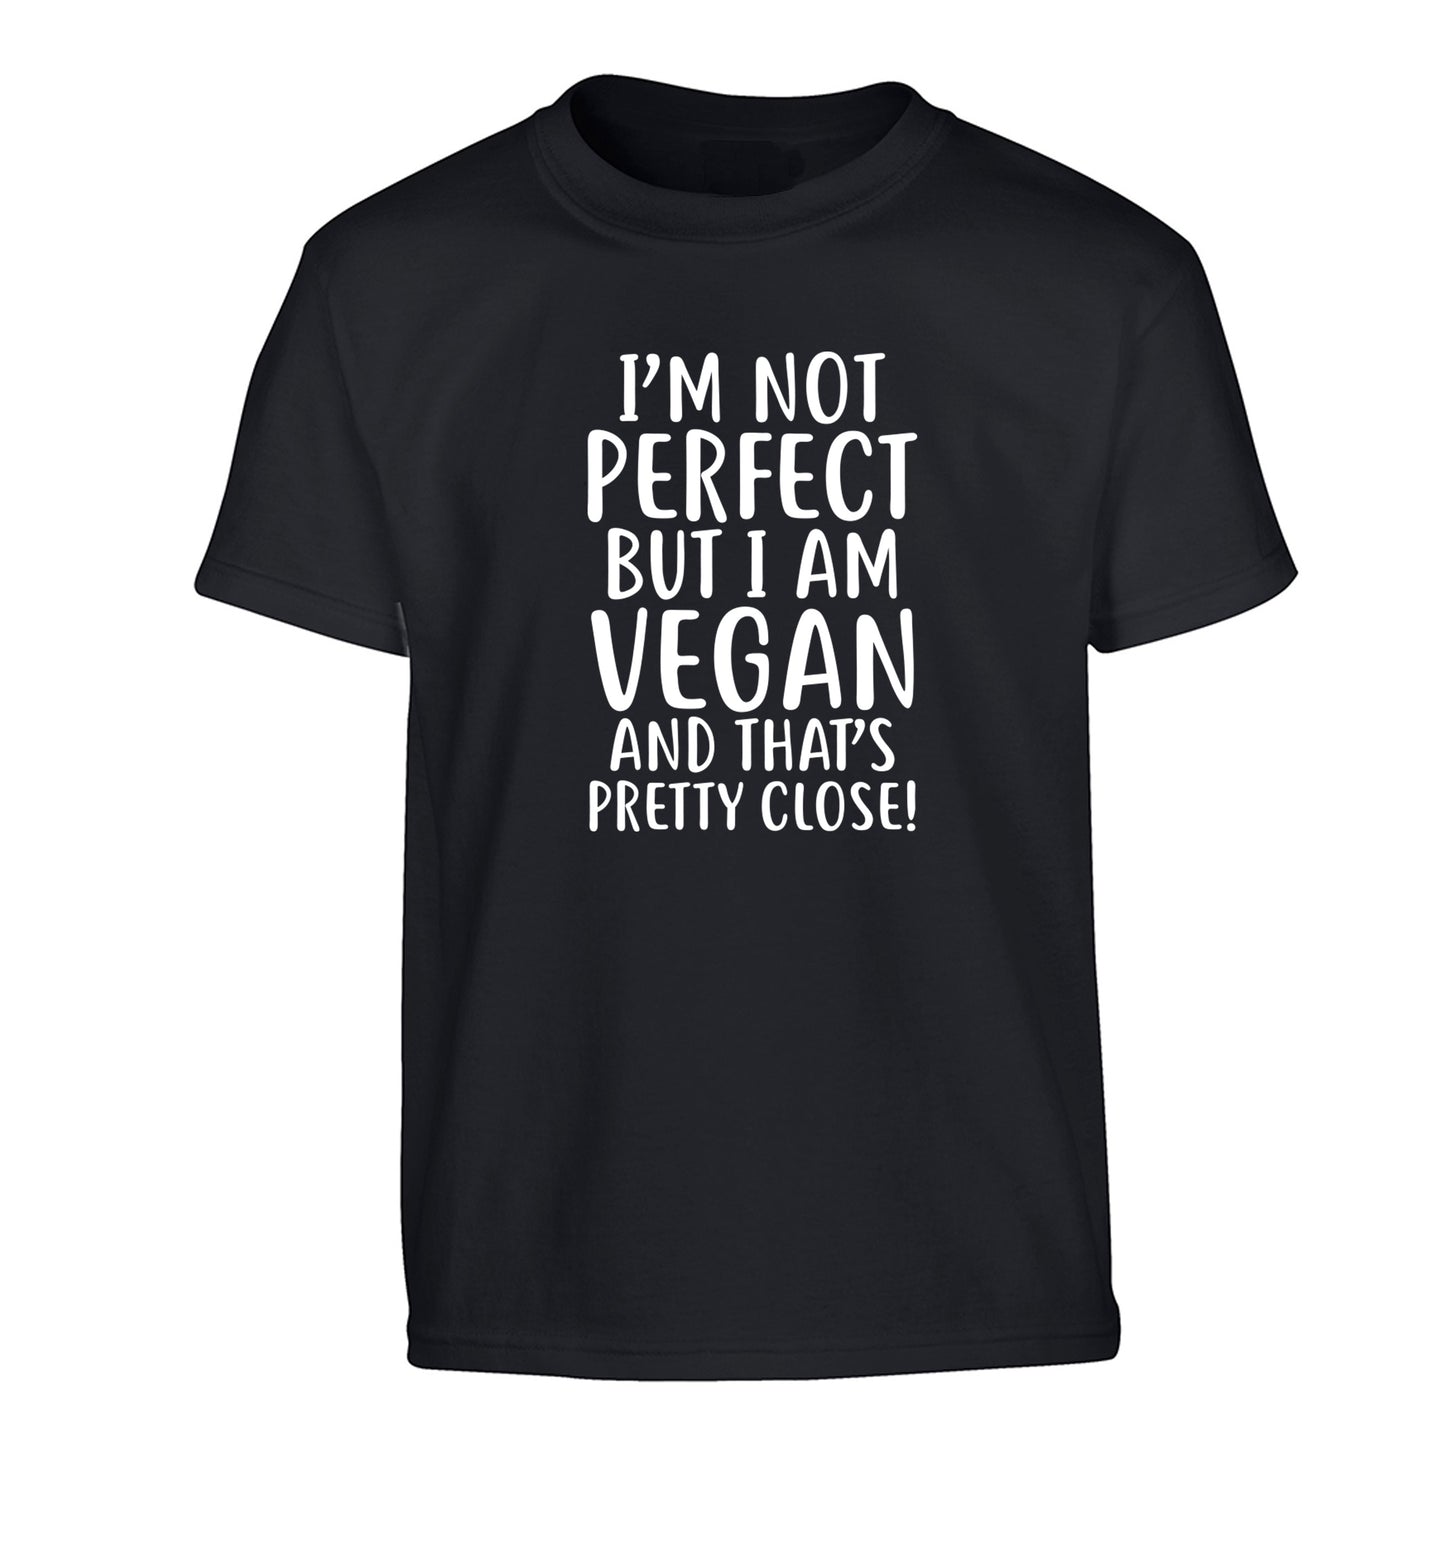 Might not be perfect but I am vegan Children's black Tshirt 12-13 Years